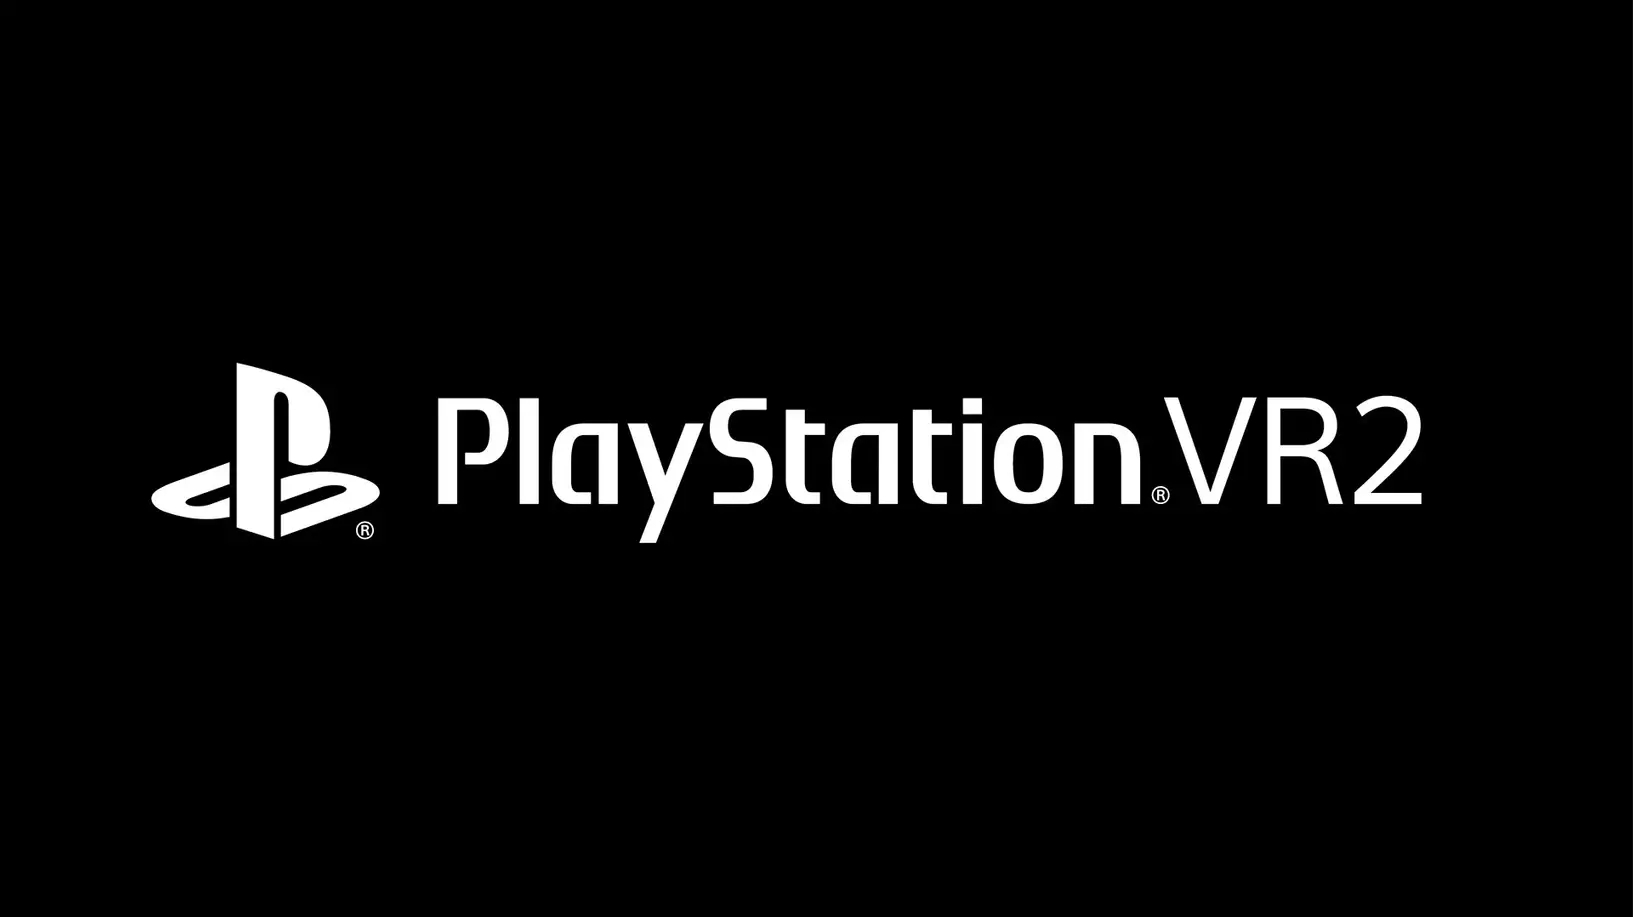 Sony Details New View Modes for PlayStation VR2, Price & Date Coming Soon